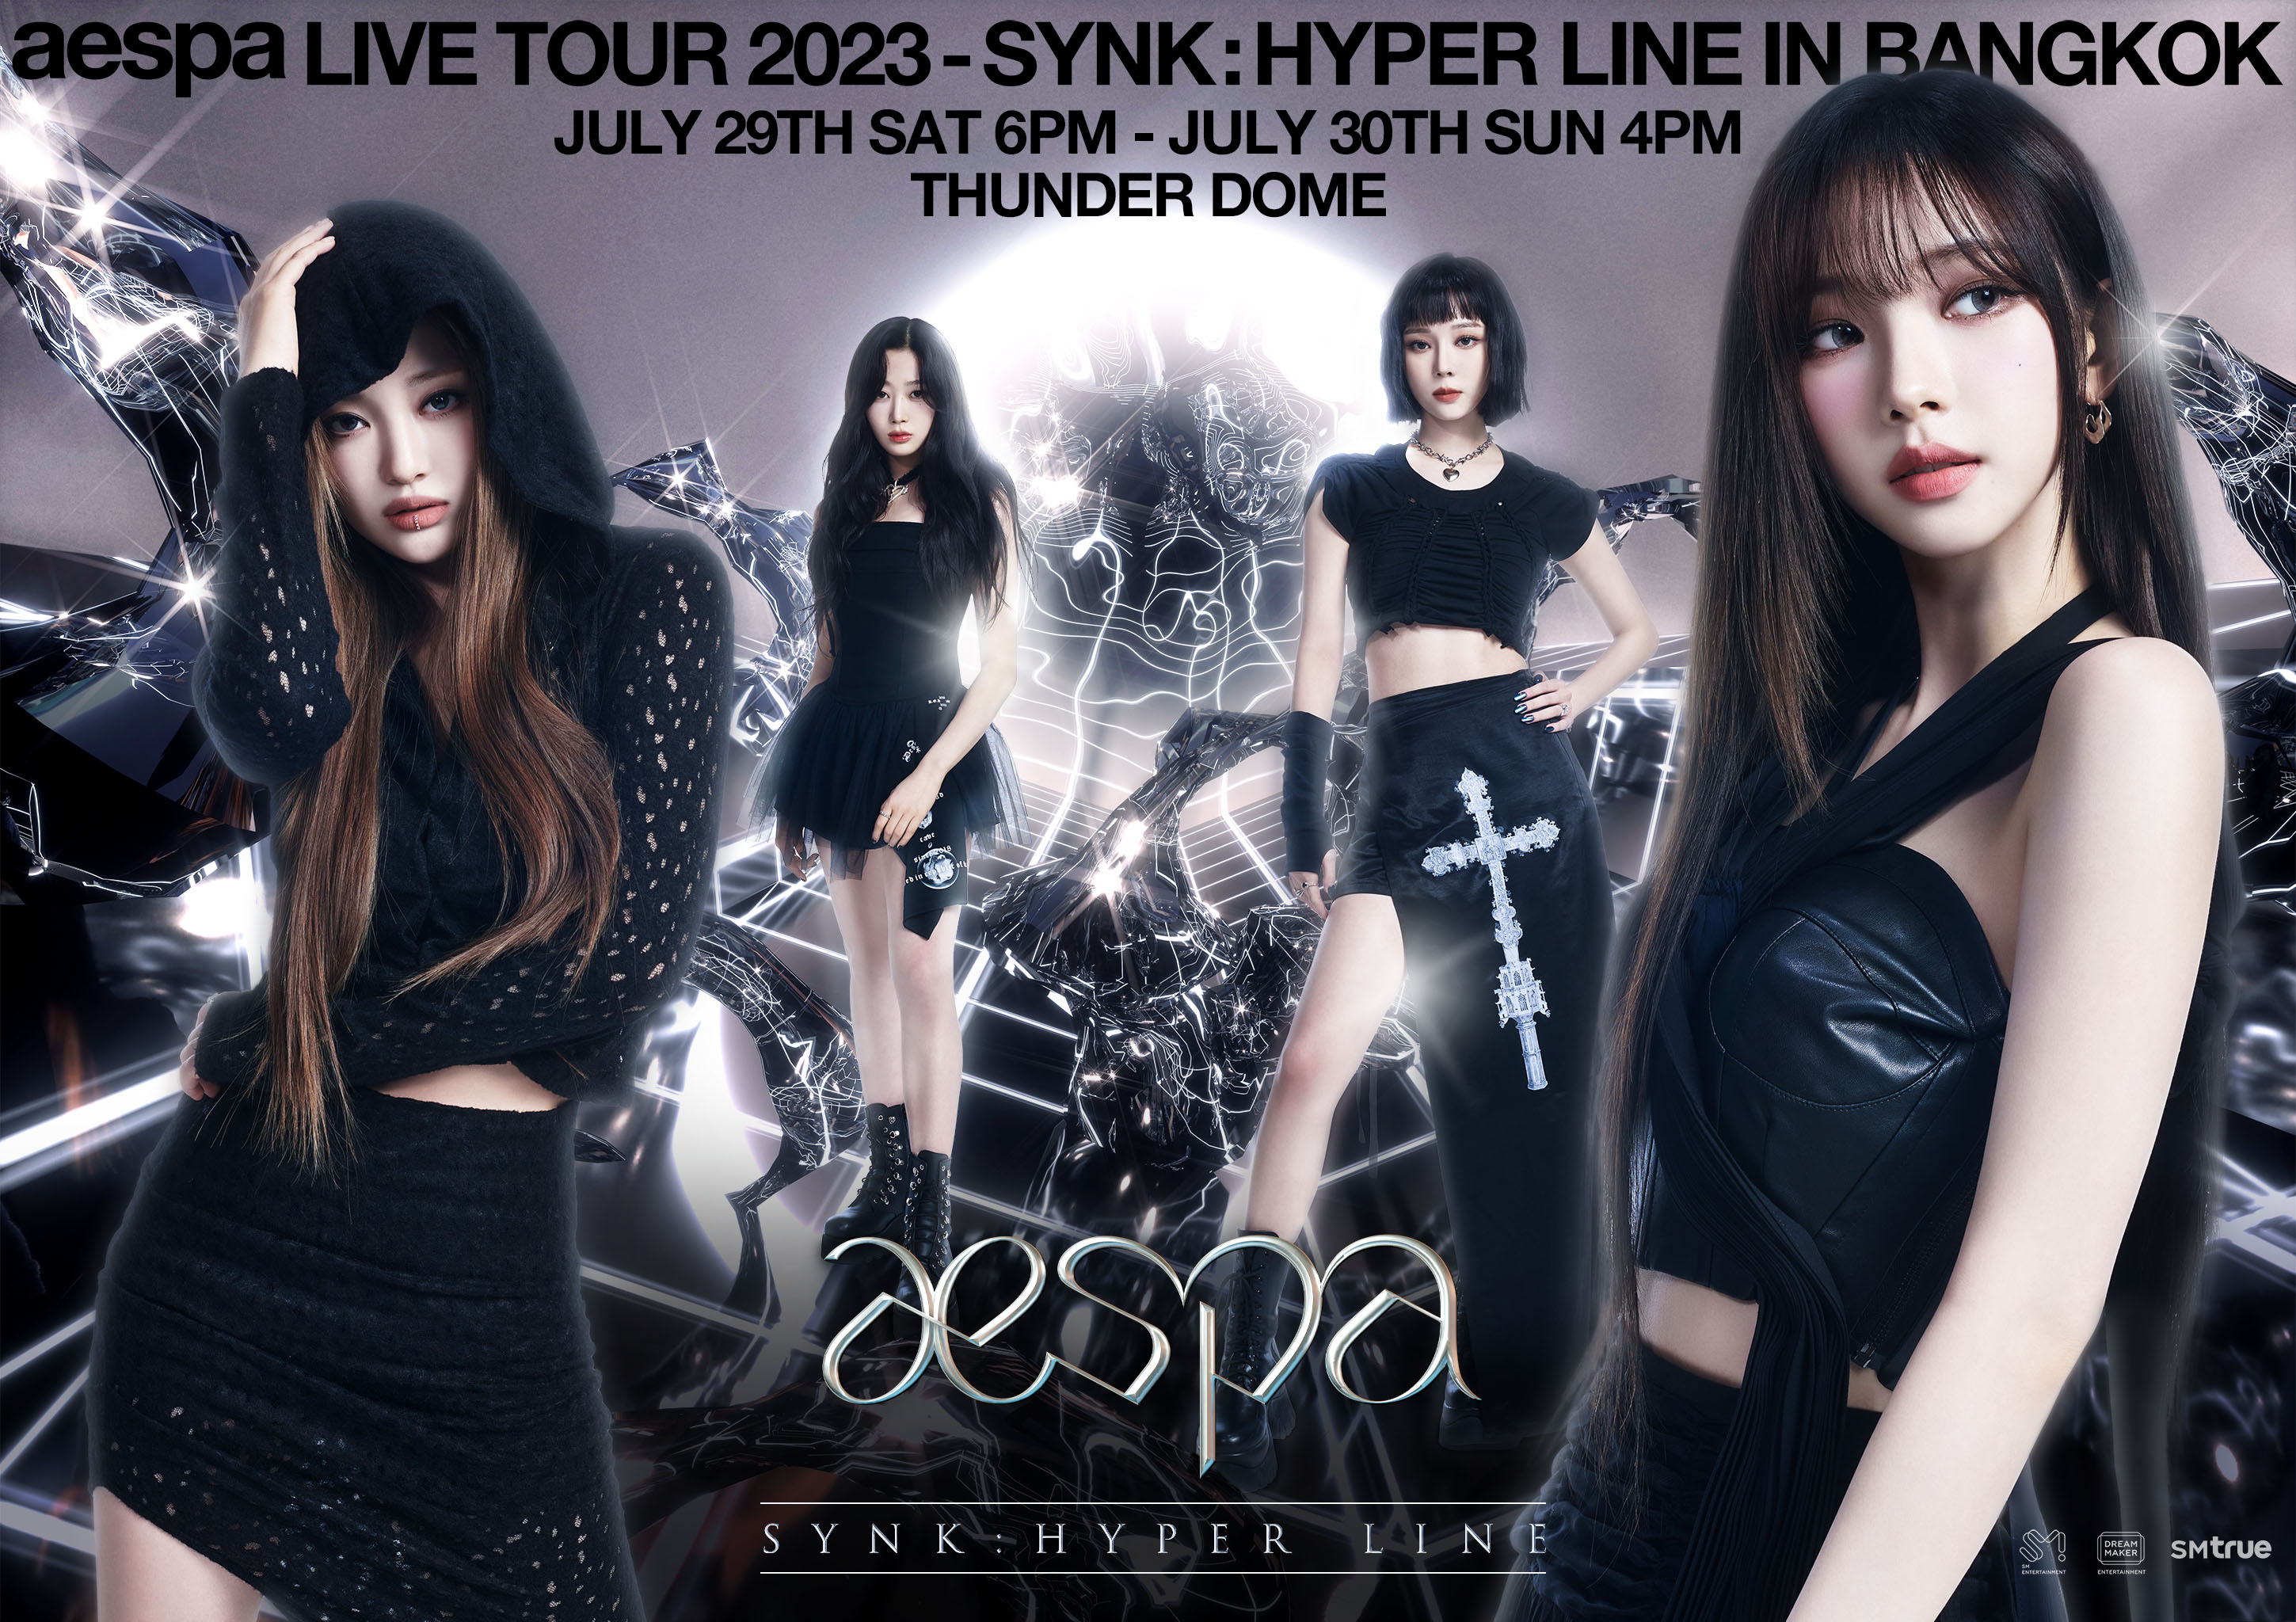 aespa LIVE TOUR 2023 ‘SYNK : HYPER LINE’ in BANGKOK